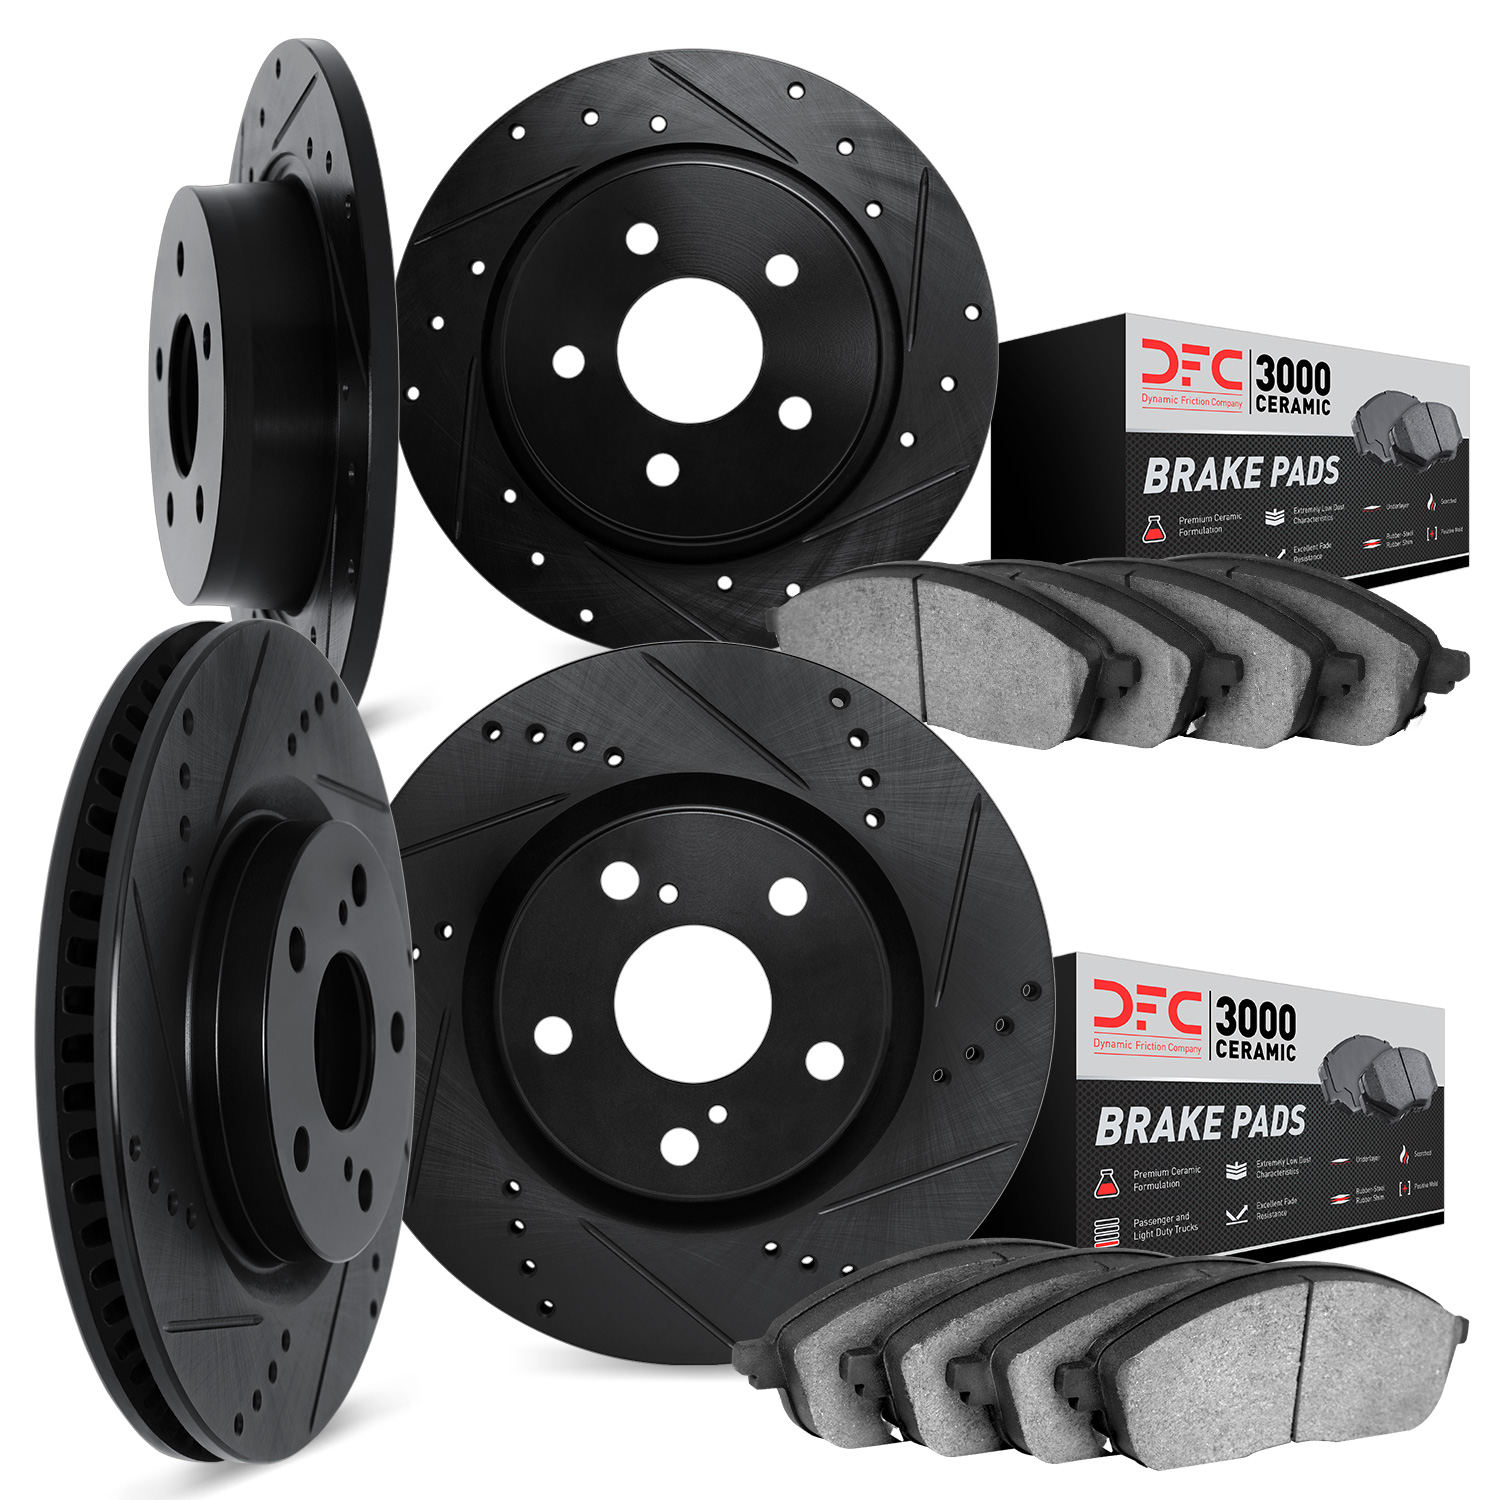 8304-59070 Drilled/Slotted Brake Rotors with 3000-Series Ceramic Brake Pads Kit [Black], 2006-2014 Acura/Honda, Position: Front